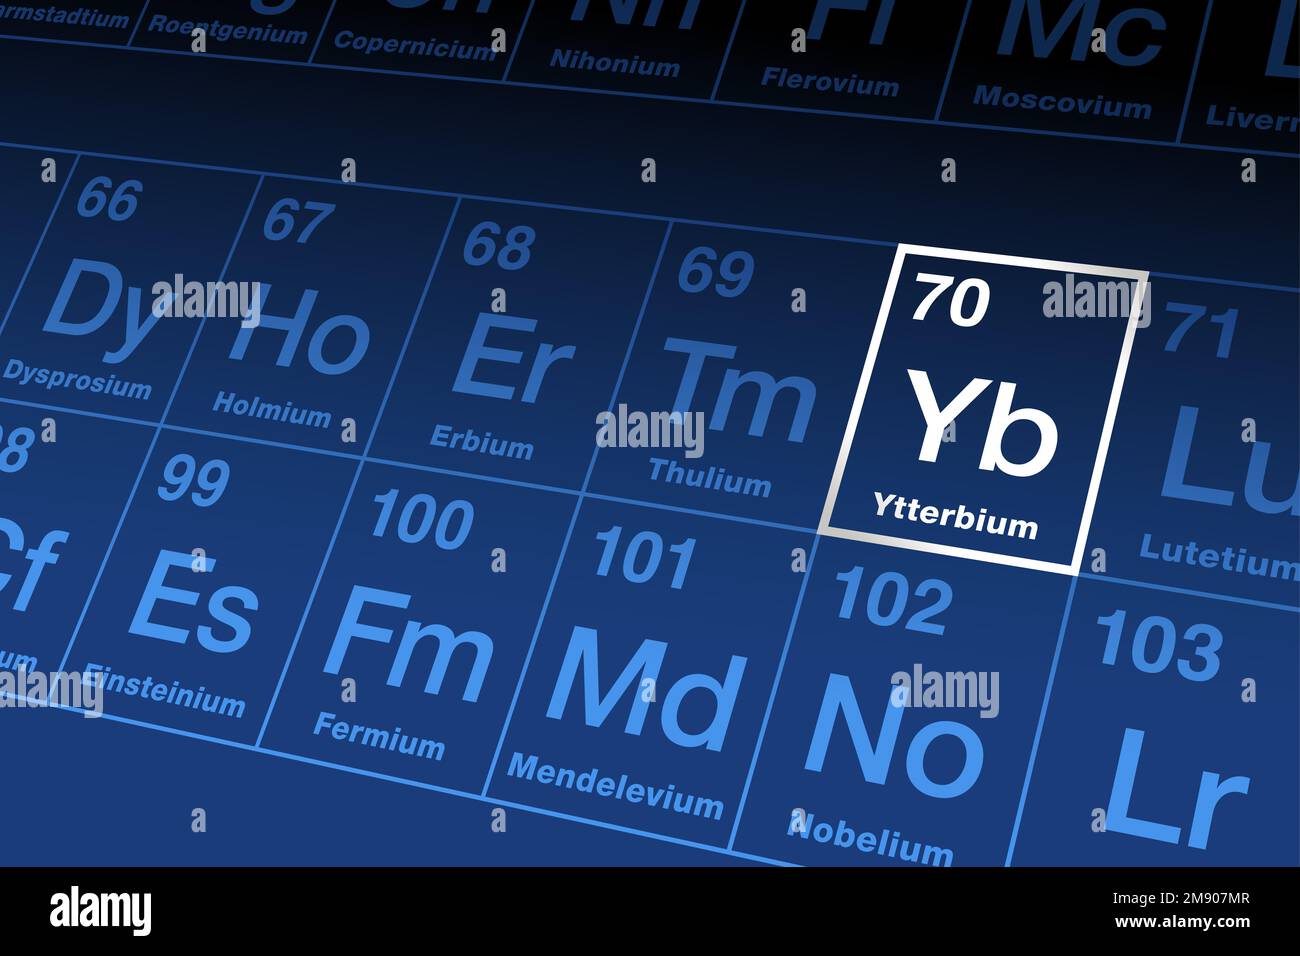 Ytterbium on periodic table. Rare earth metal in the lanthanide series with atomic number 70 and element symbol Yb, after the Swedish village Ytterby. Stock Photo